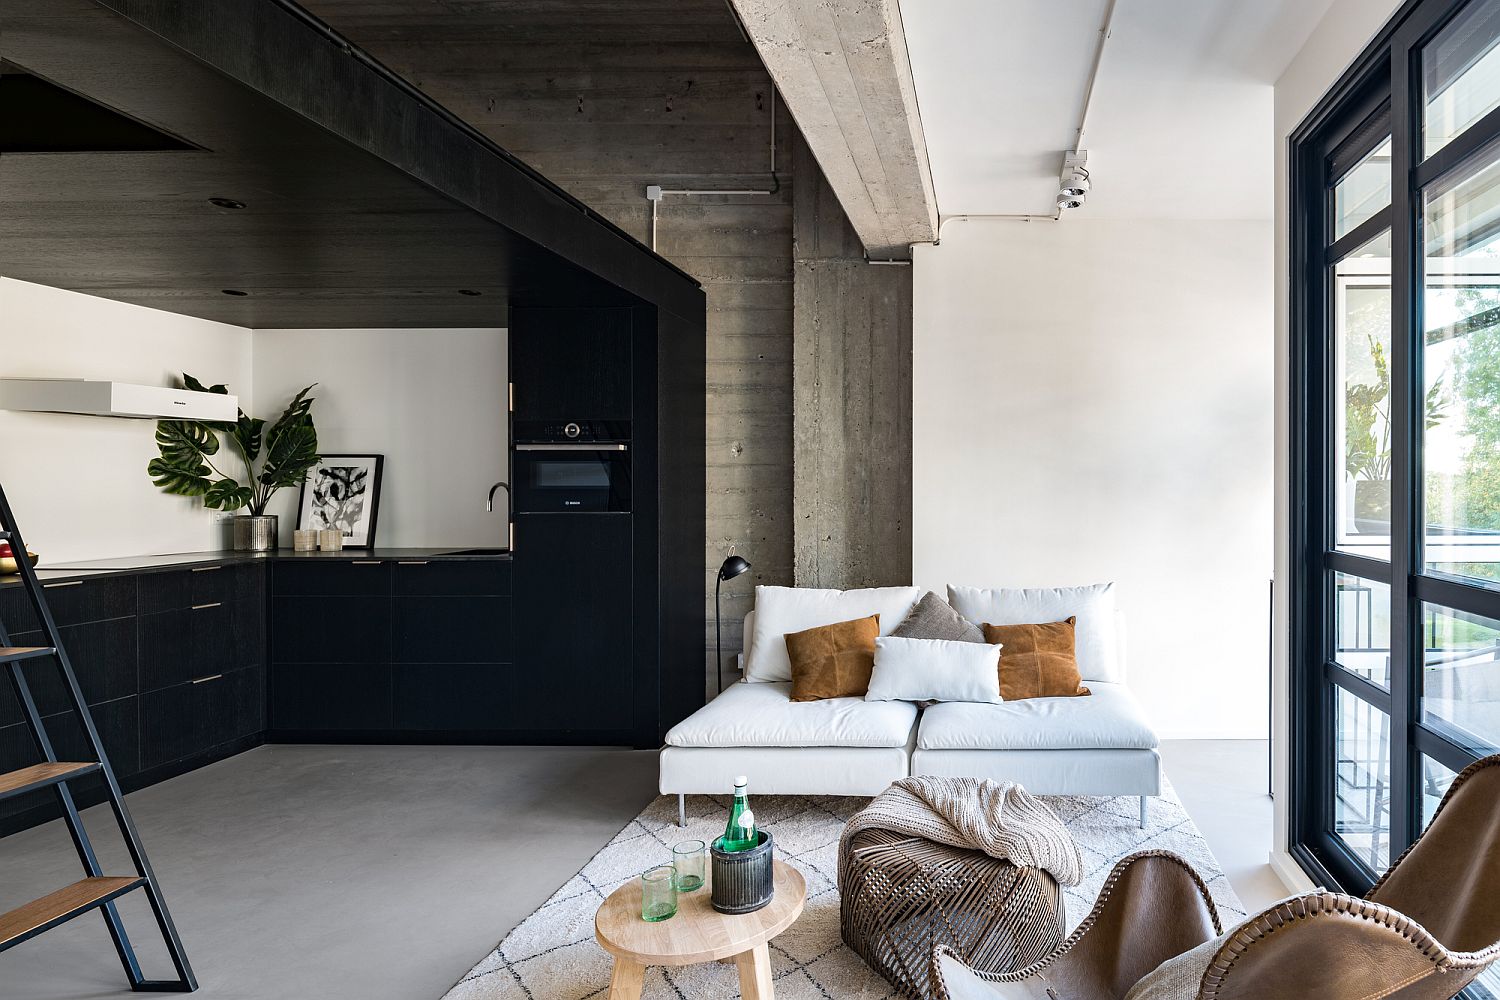 Combining-raw-concrete-with-polished-modern-finishes-inside-the-posh-loft